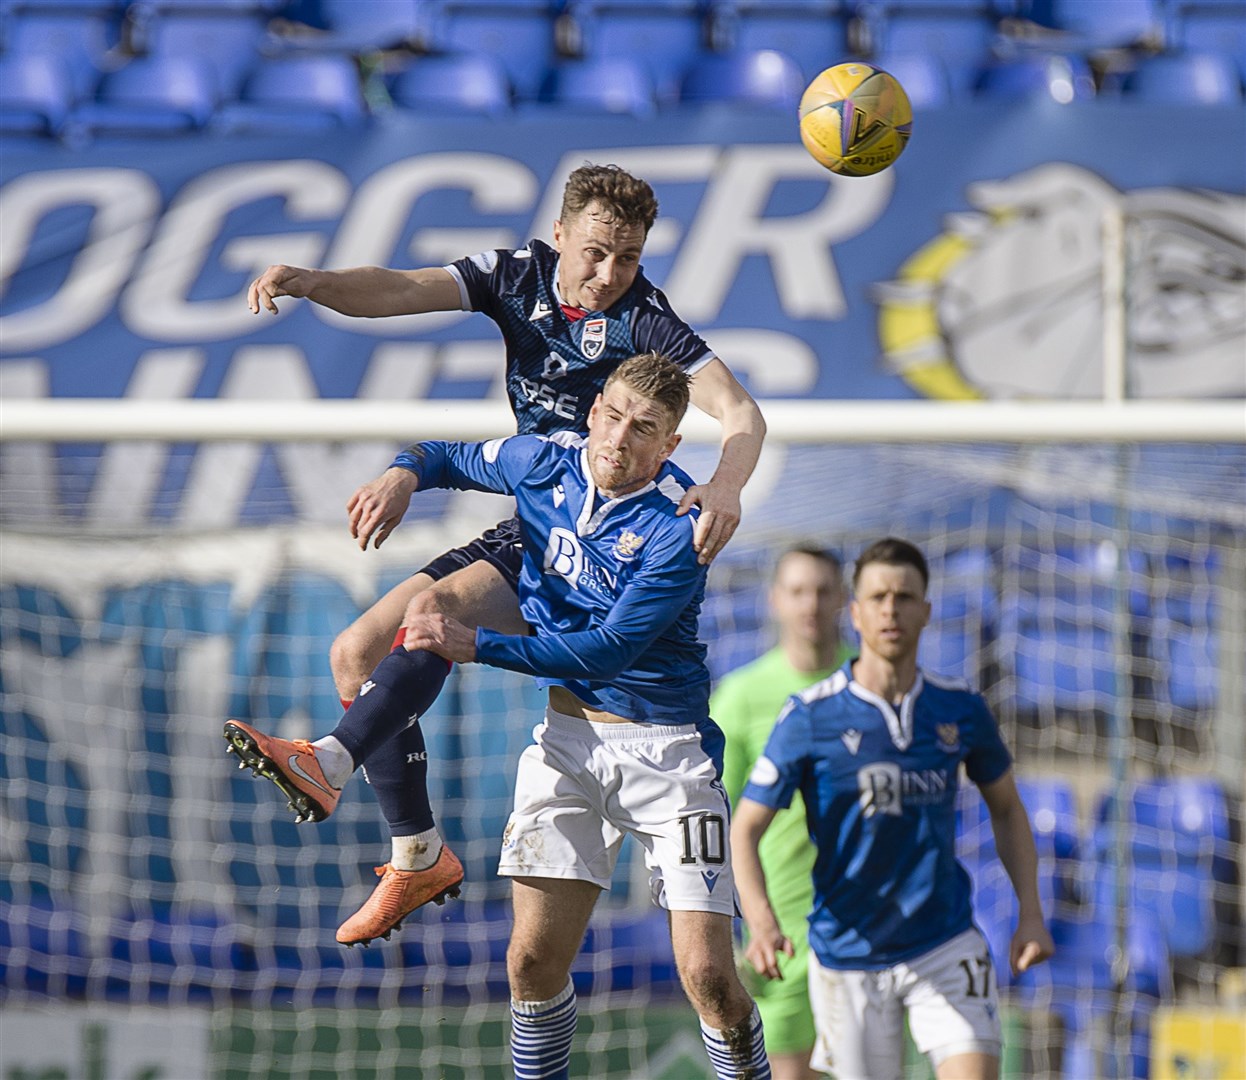 Picture - Ken Macpherson, Inverness. St. Johnstone(1) v Ross County(?0). 20.03.21. Ross County's Jordan Tillson rises above St.Johnstone's David Wotherspoon to head clear.